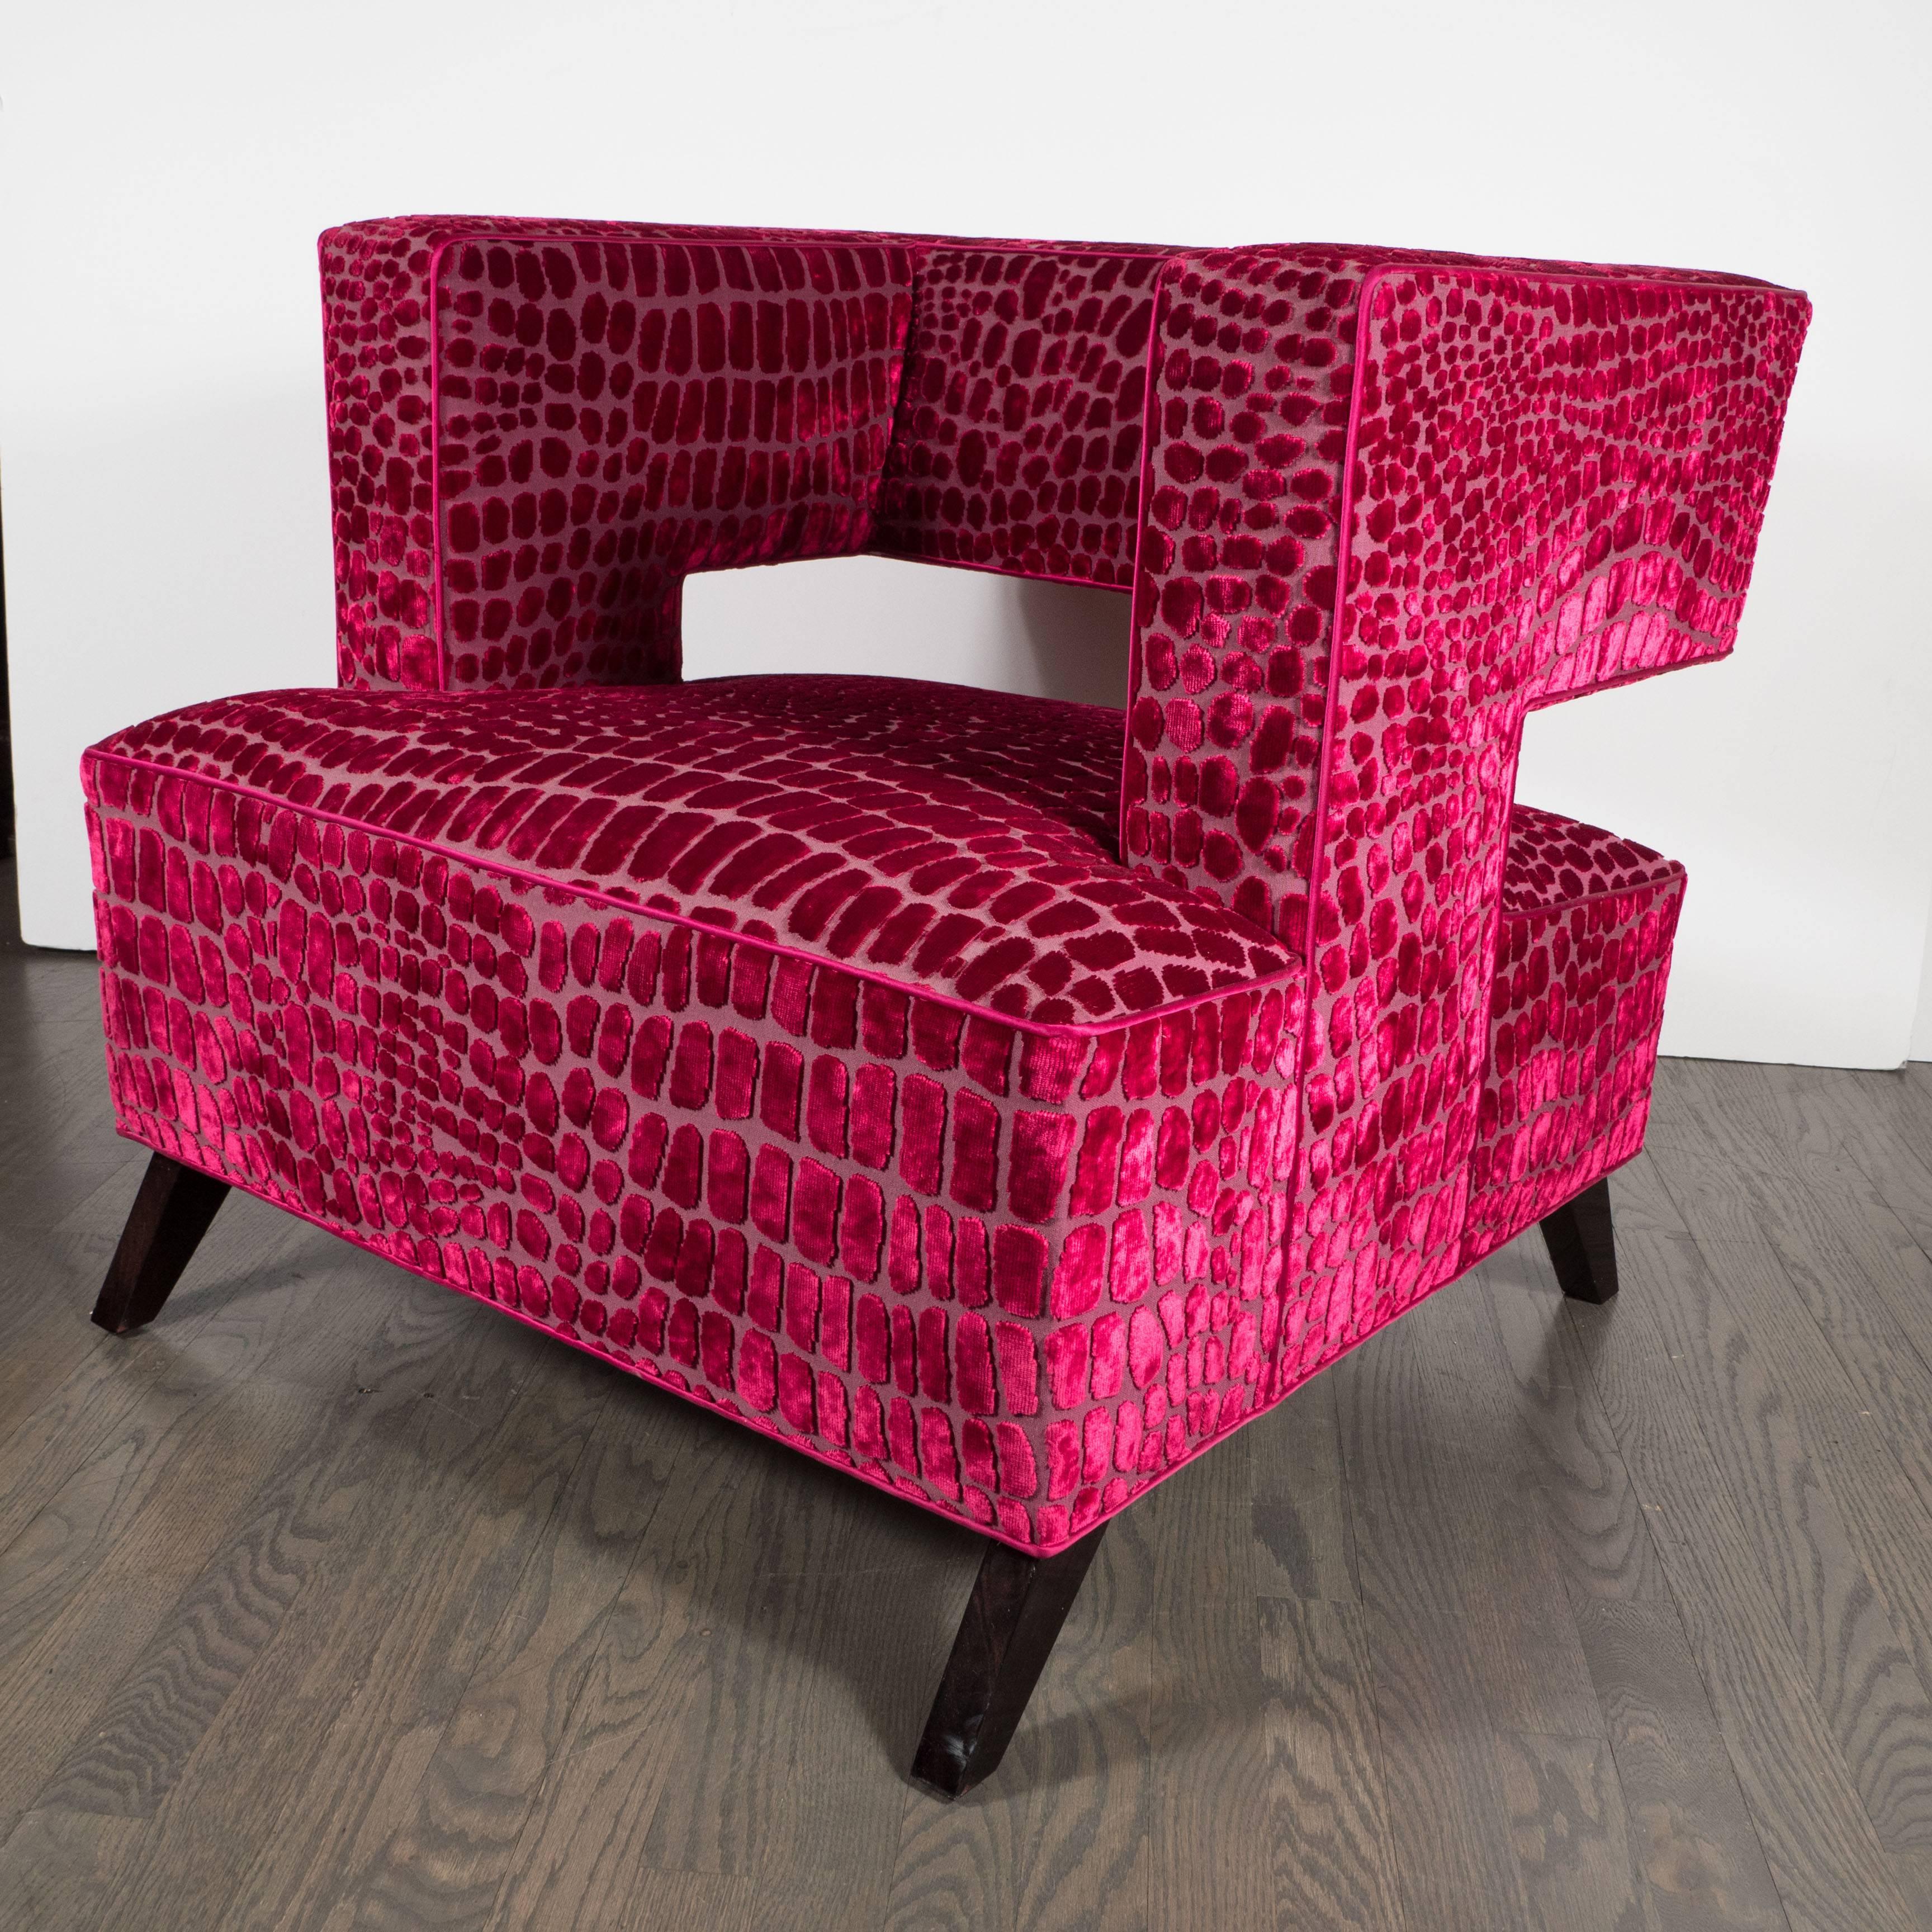 A pair of sculptural Mid-Century Modernist club or armchairs, a cubist design featuring strong angular lines, newly upholstered in a fuchsia croc Gauffraged velvet. They have a wraparound open-back and low profile, the tapered legs are ebonized